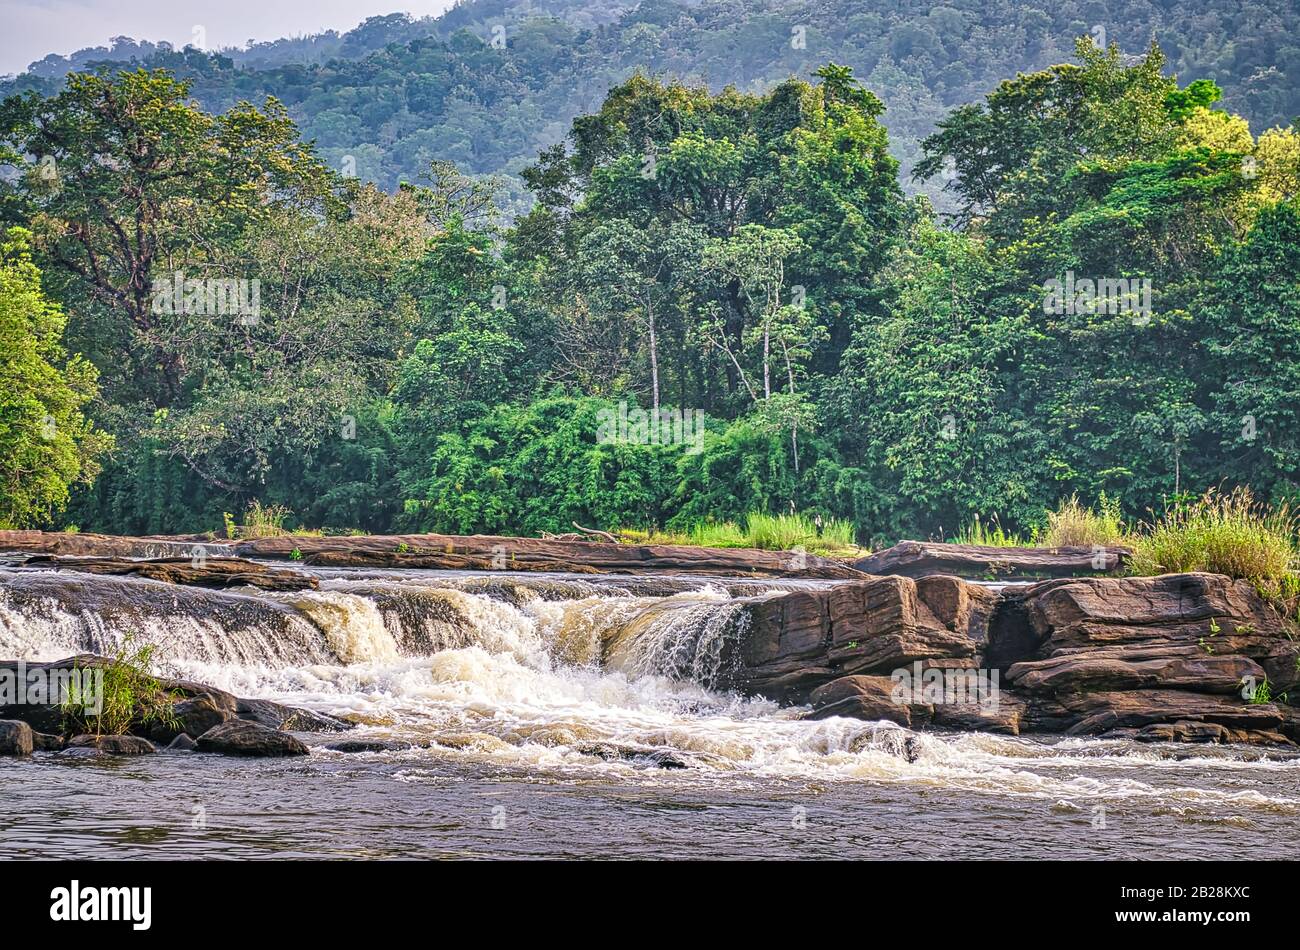 Waterfall through rocks in a river banked by thick green vegetation in Kerala, India. Stock Photo